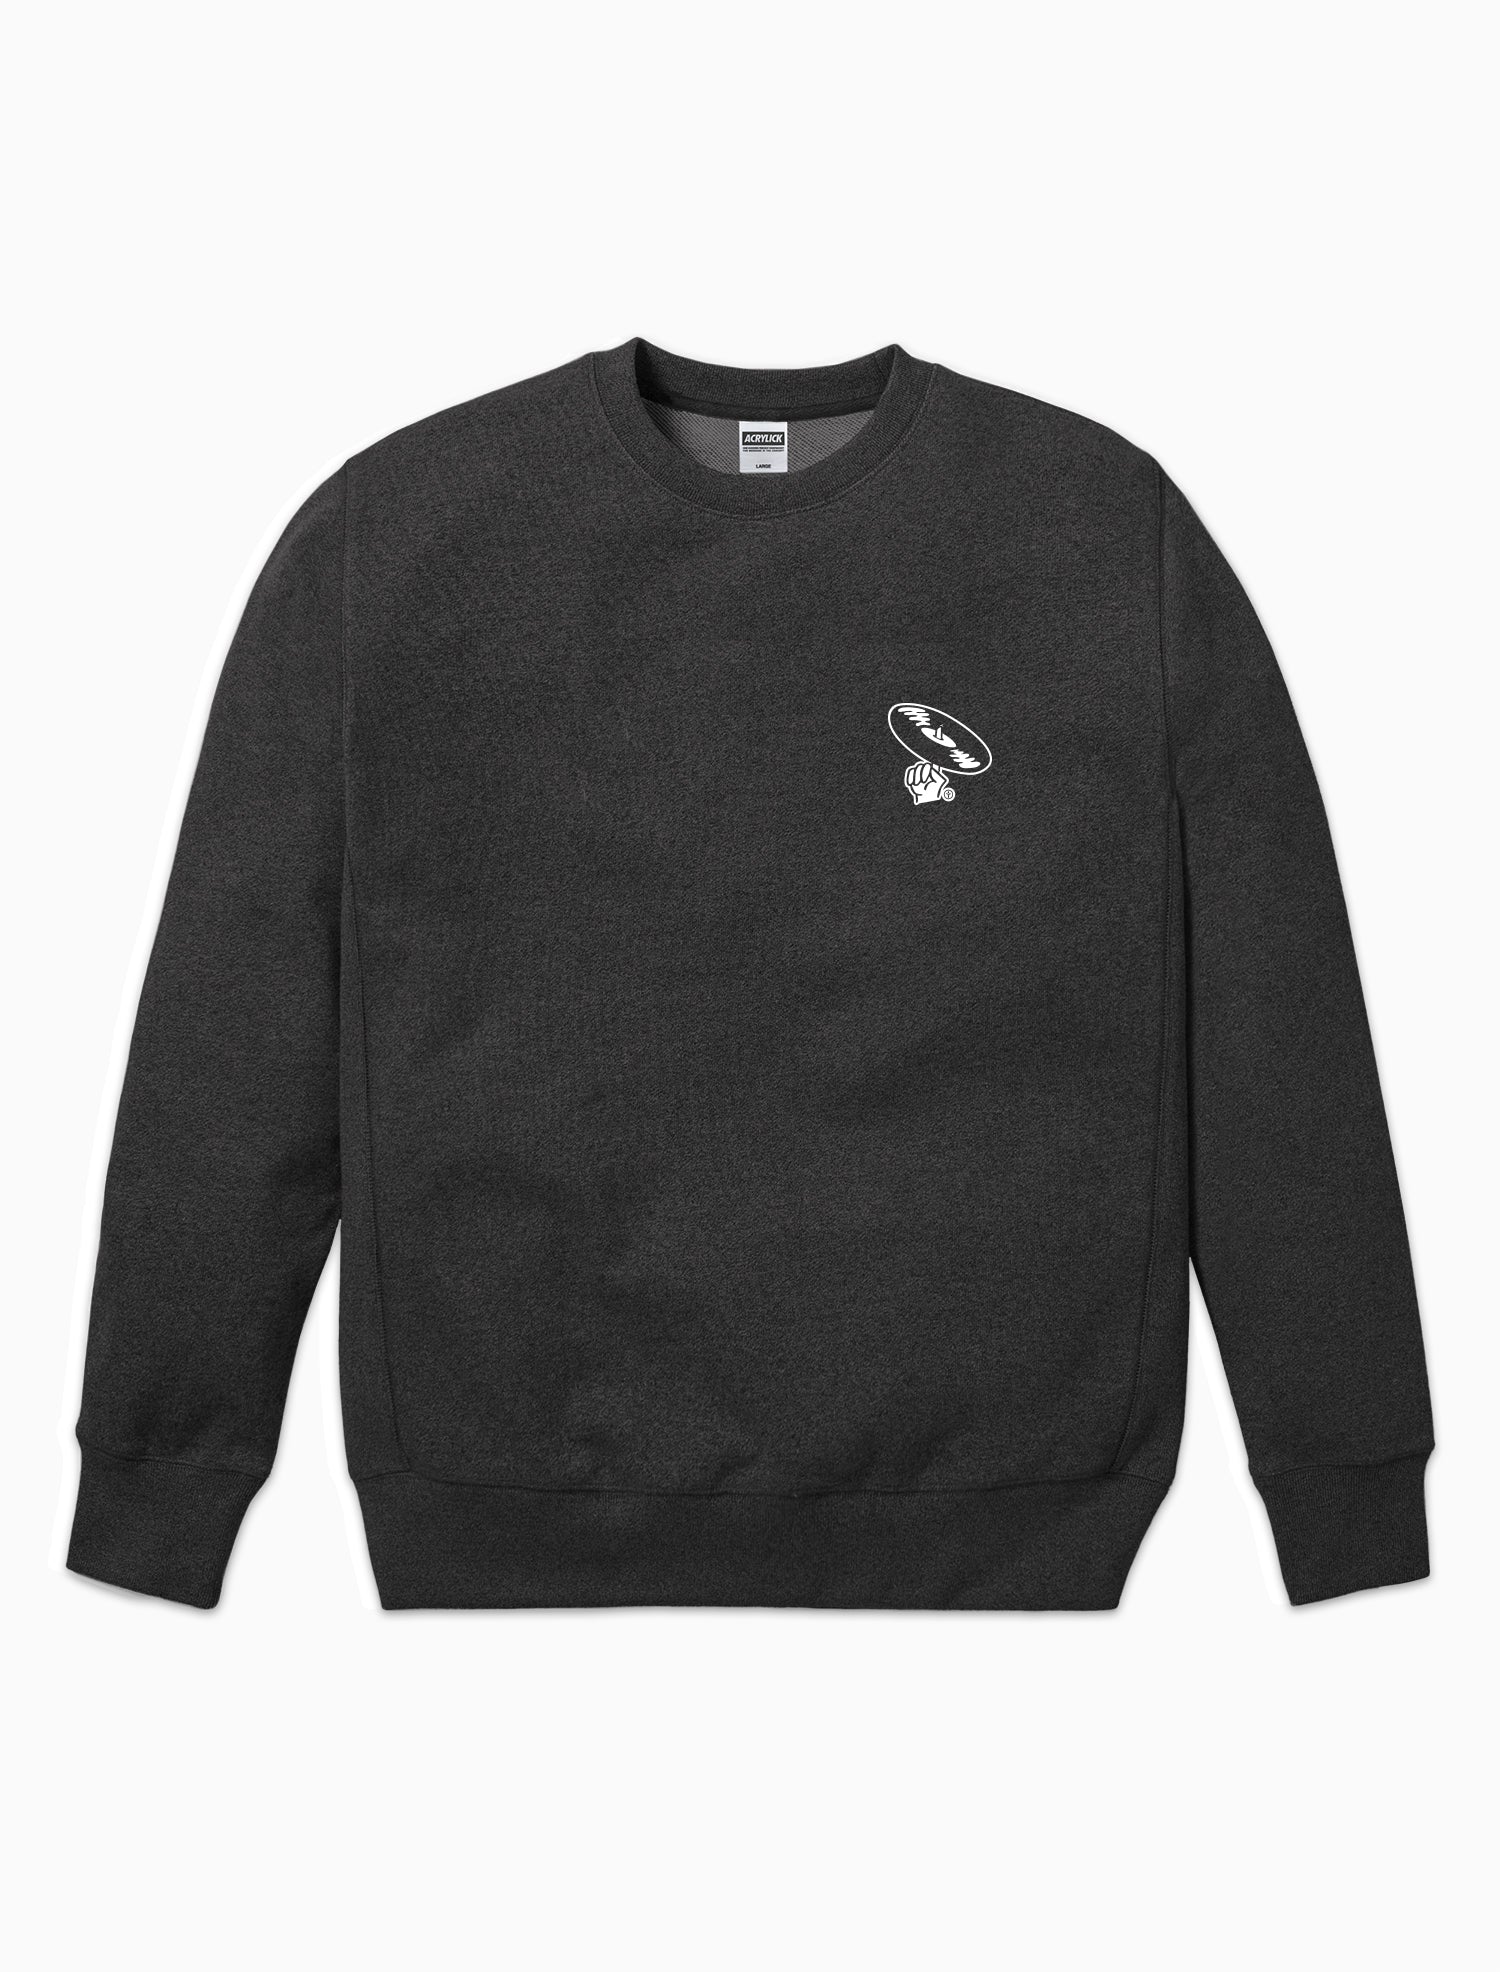 Acrylick Goods - One Nation Crewneck Available in Black and Charcoal Heather